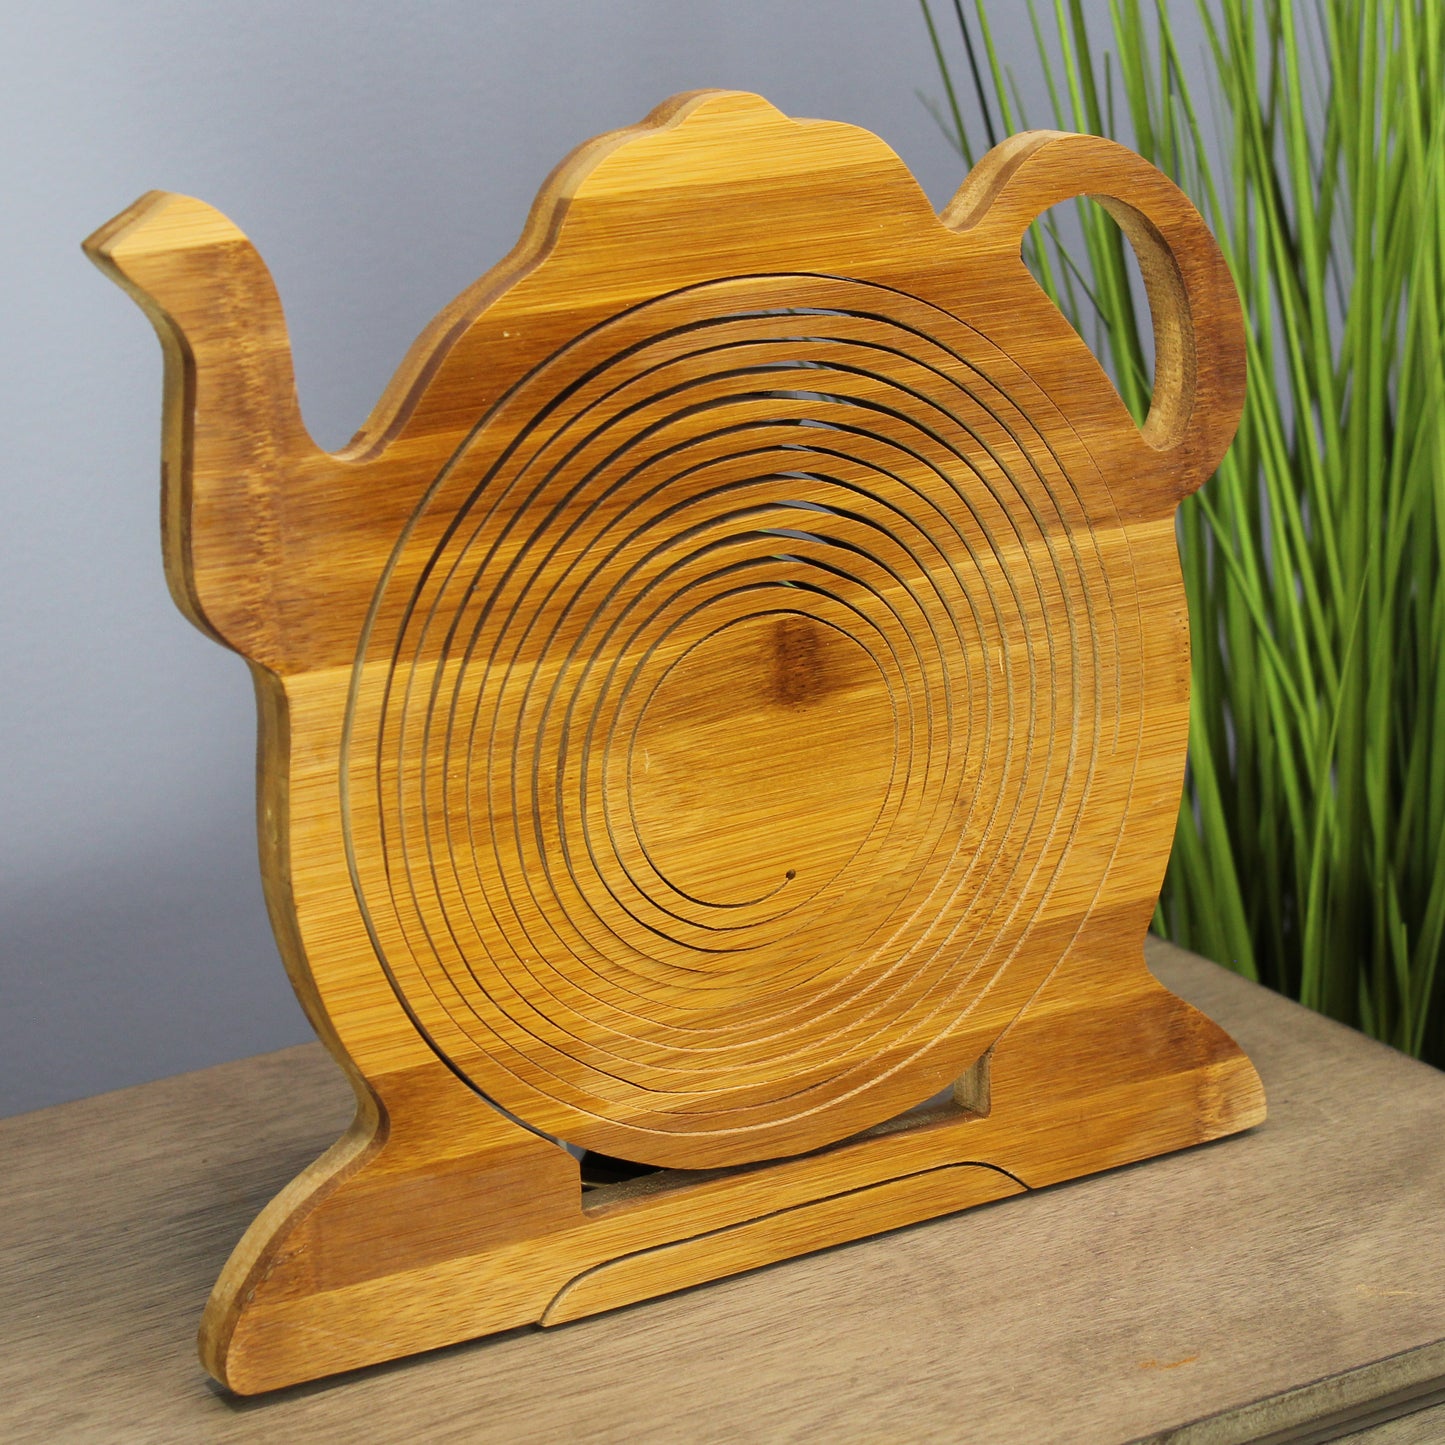 Natural Geo Handcarved Wooden Teapot Collapsible Fruit Basket